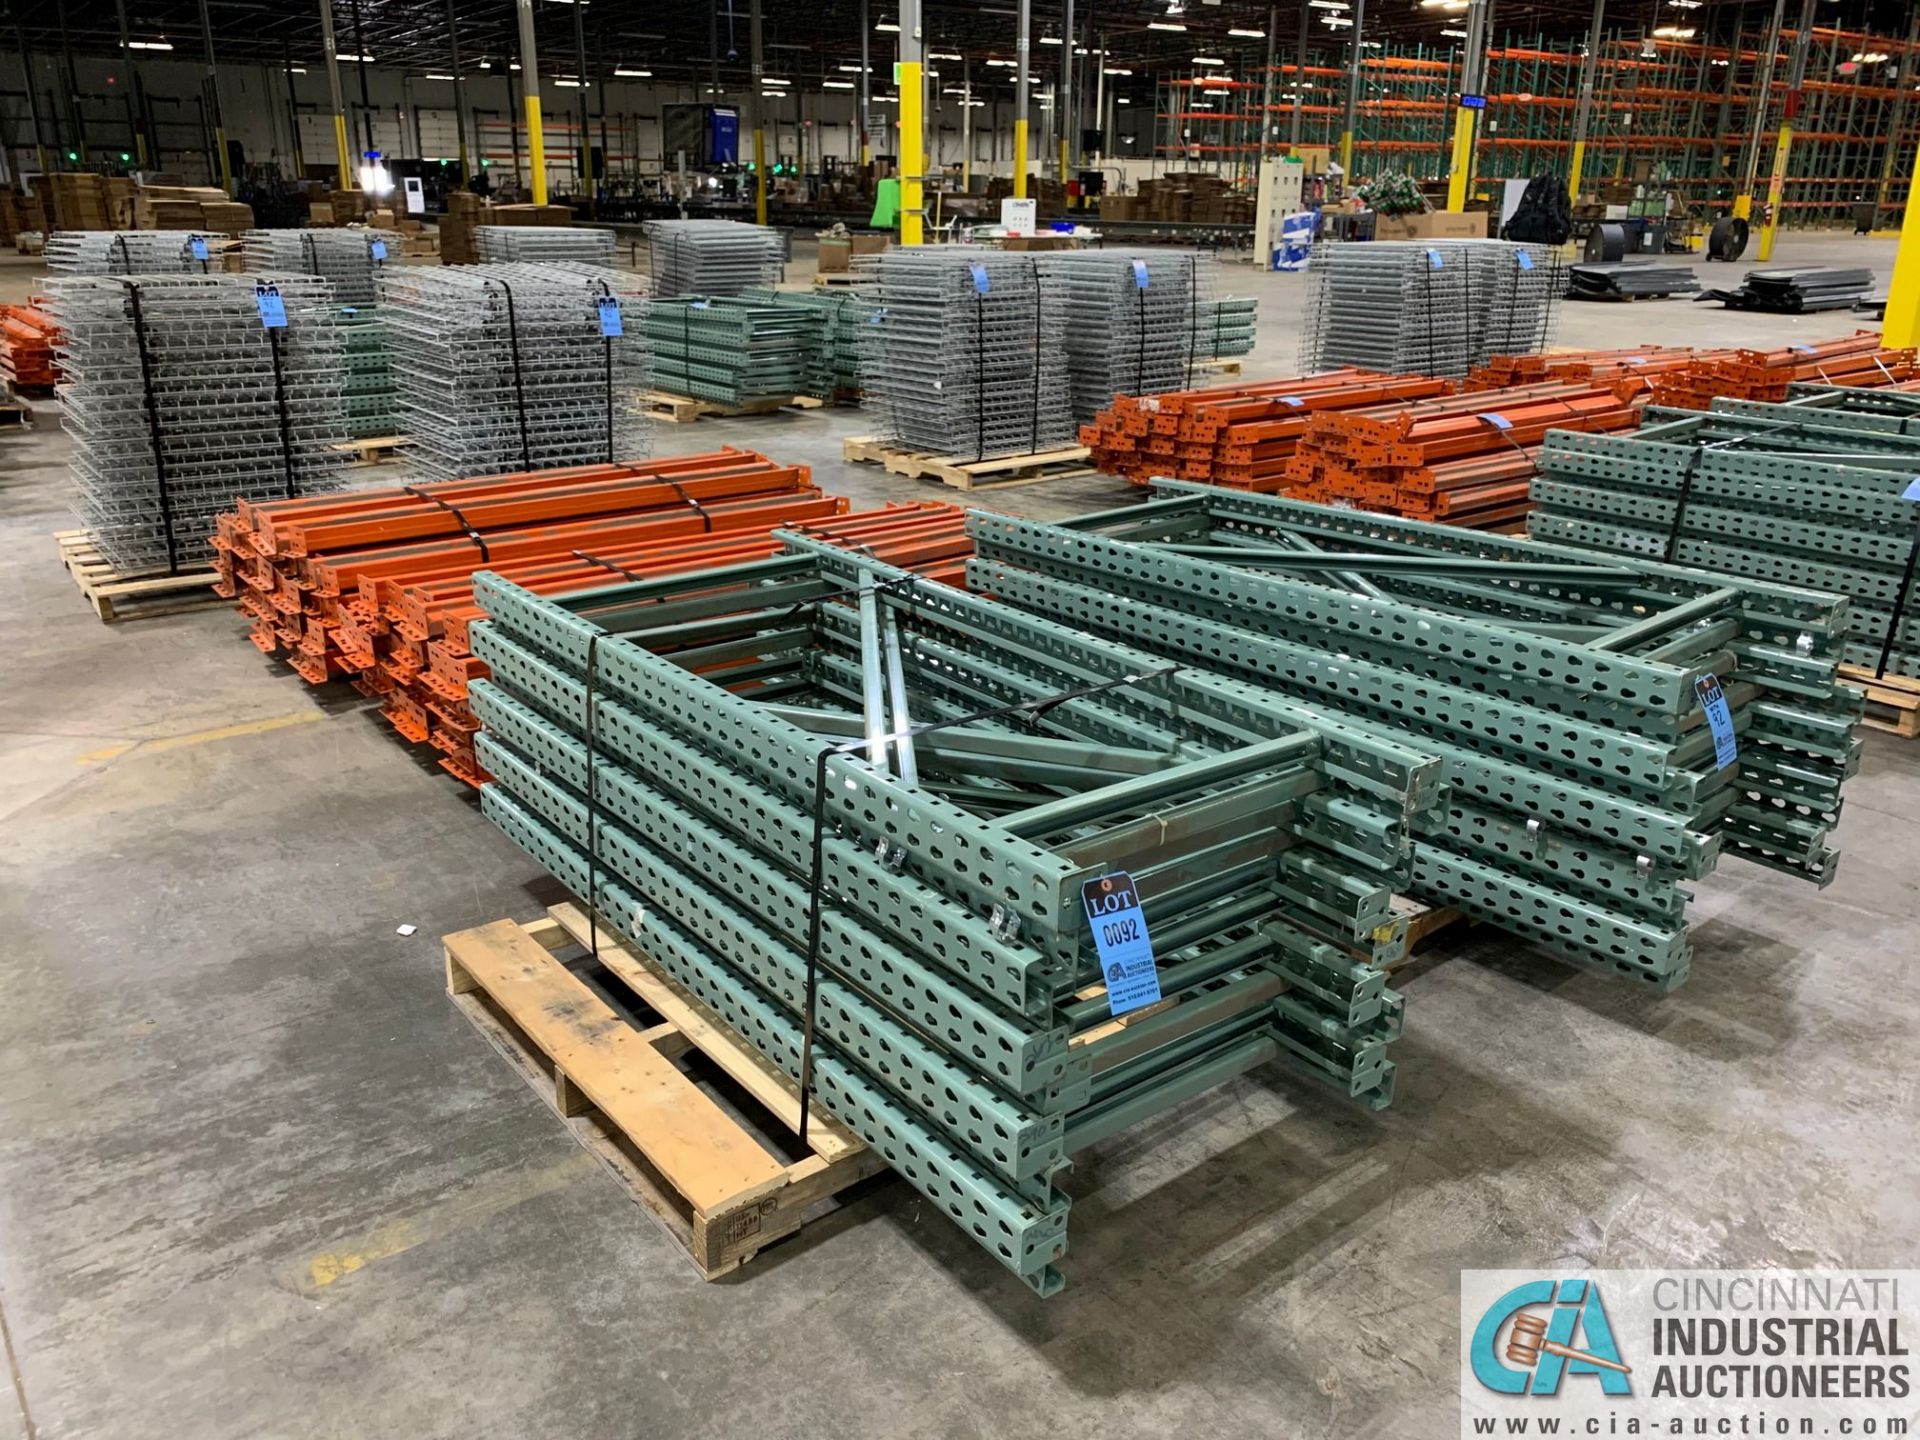 FREE-STANDING SECTIONS 30" X 72" X 72" HIGH ADJUSTABLE BEAM WIRE DECK PALLET RACK CONSISTING OF